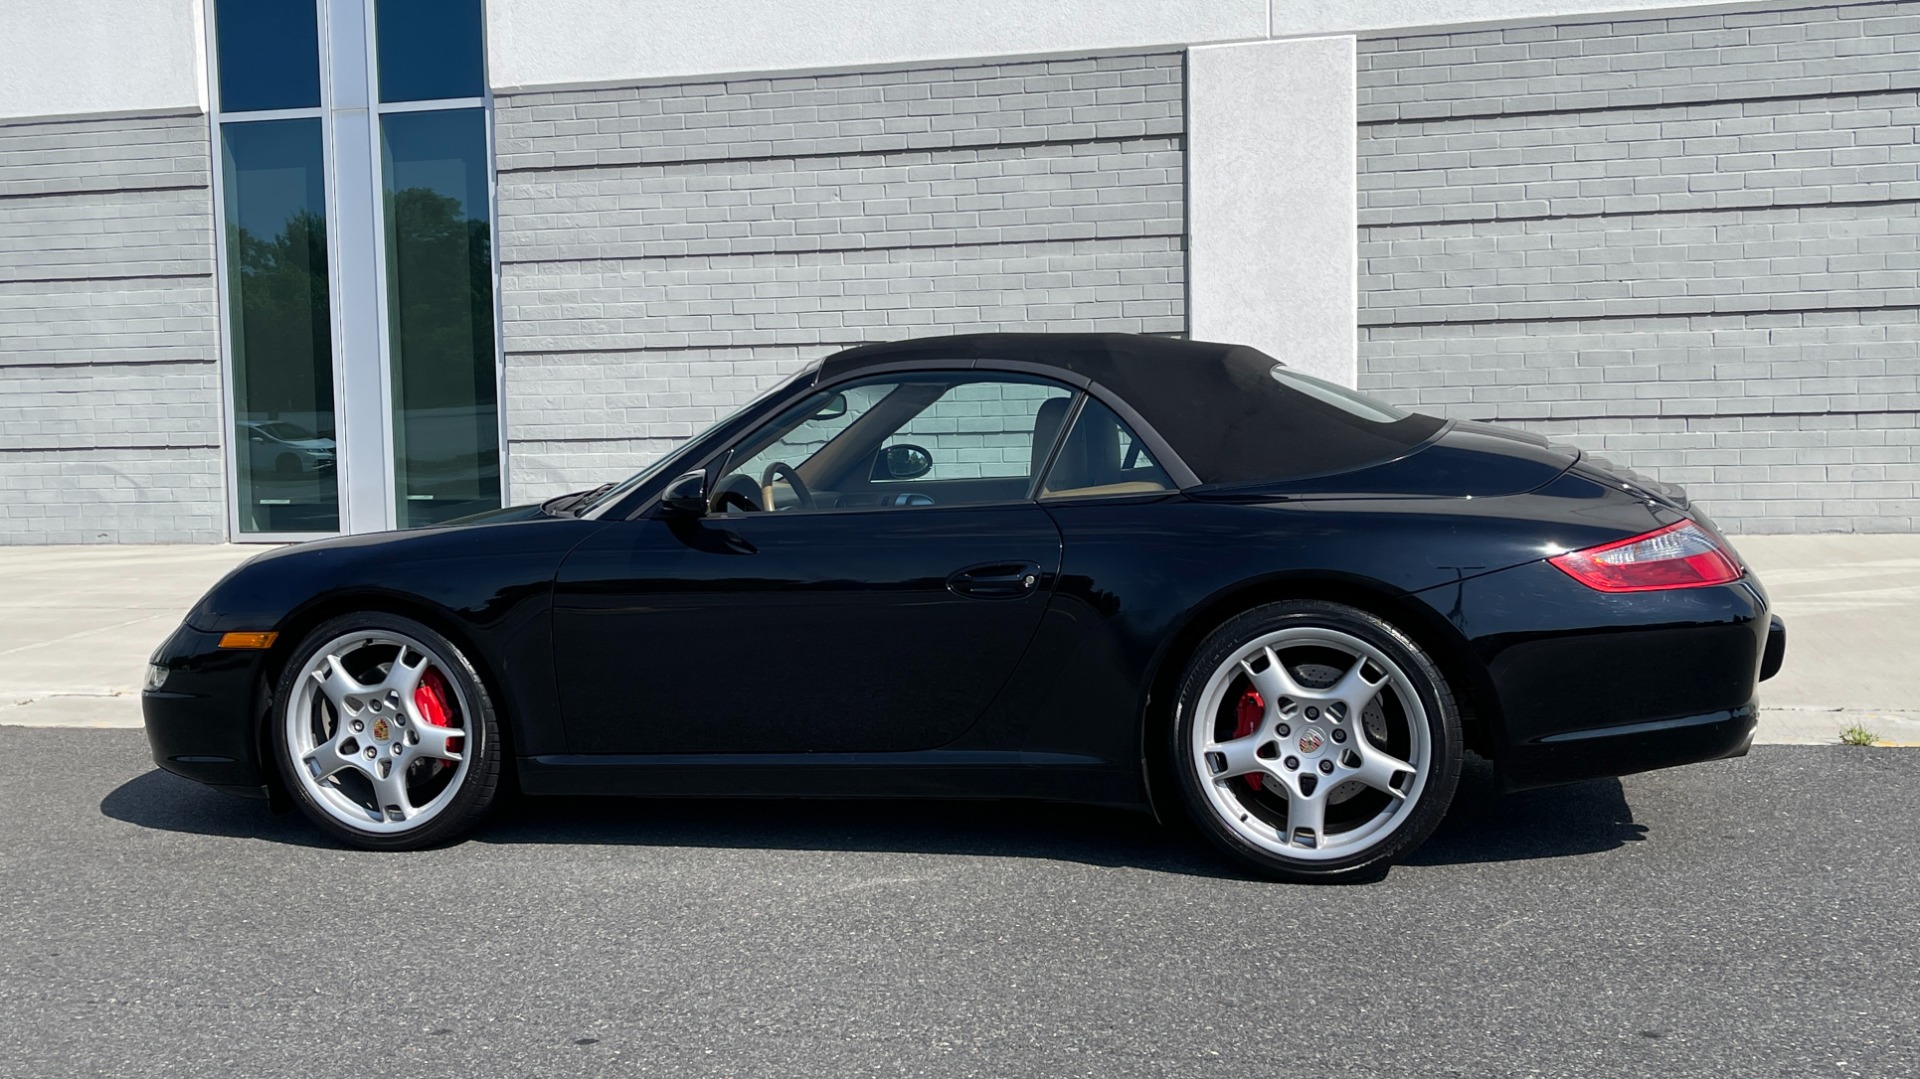 Used 2006 Porsche 911 CARRERA S CABRIOLET / BOSE / CD CHANGER / PWR SEAT PKG / HTD STS for sale $56,400 at Formula Imports in Charlotte NC 28227 13